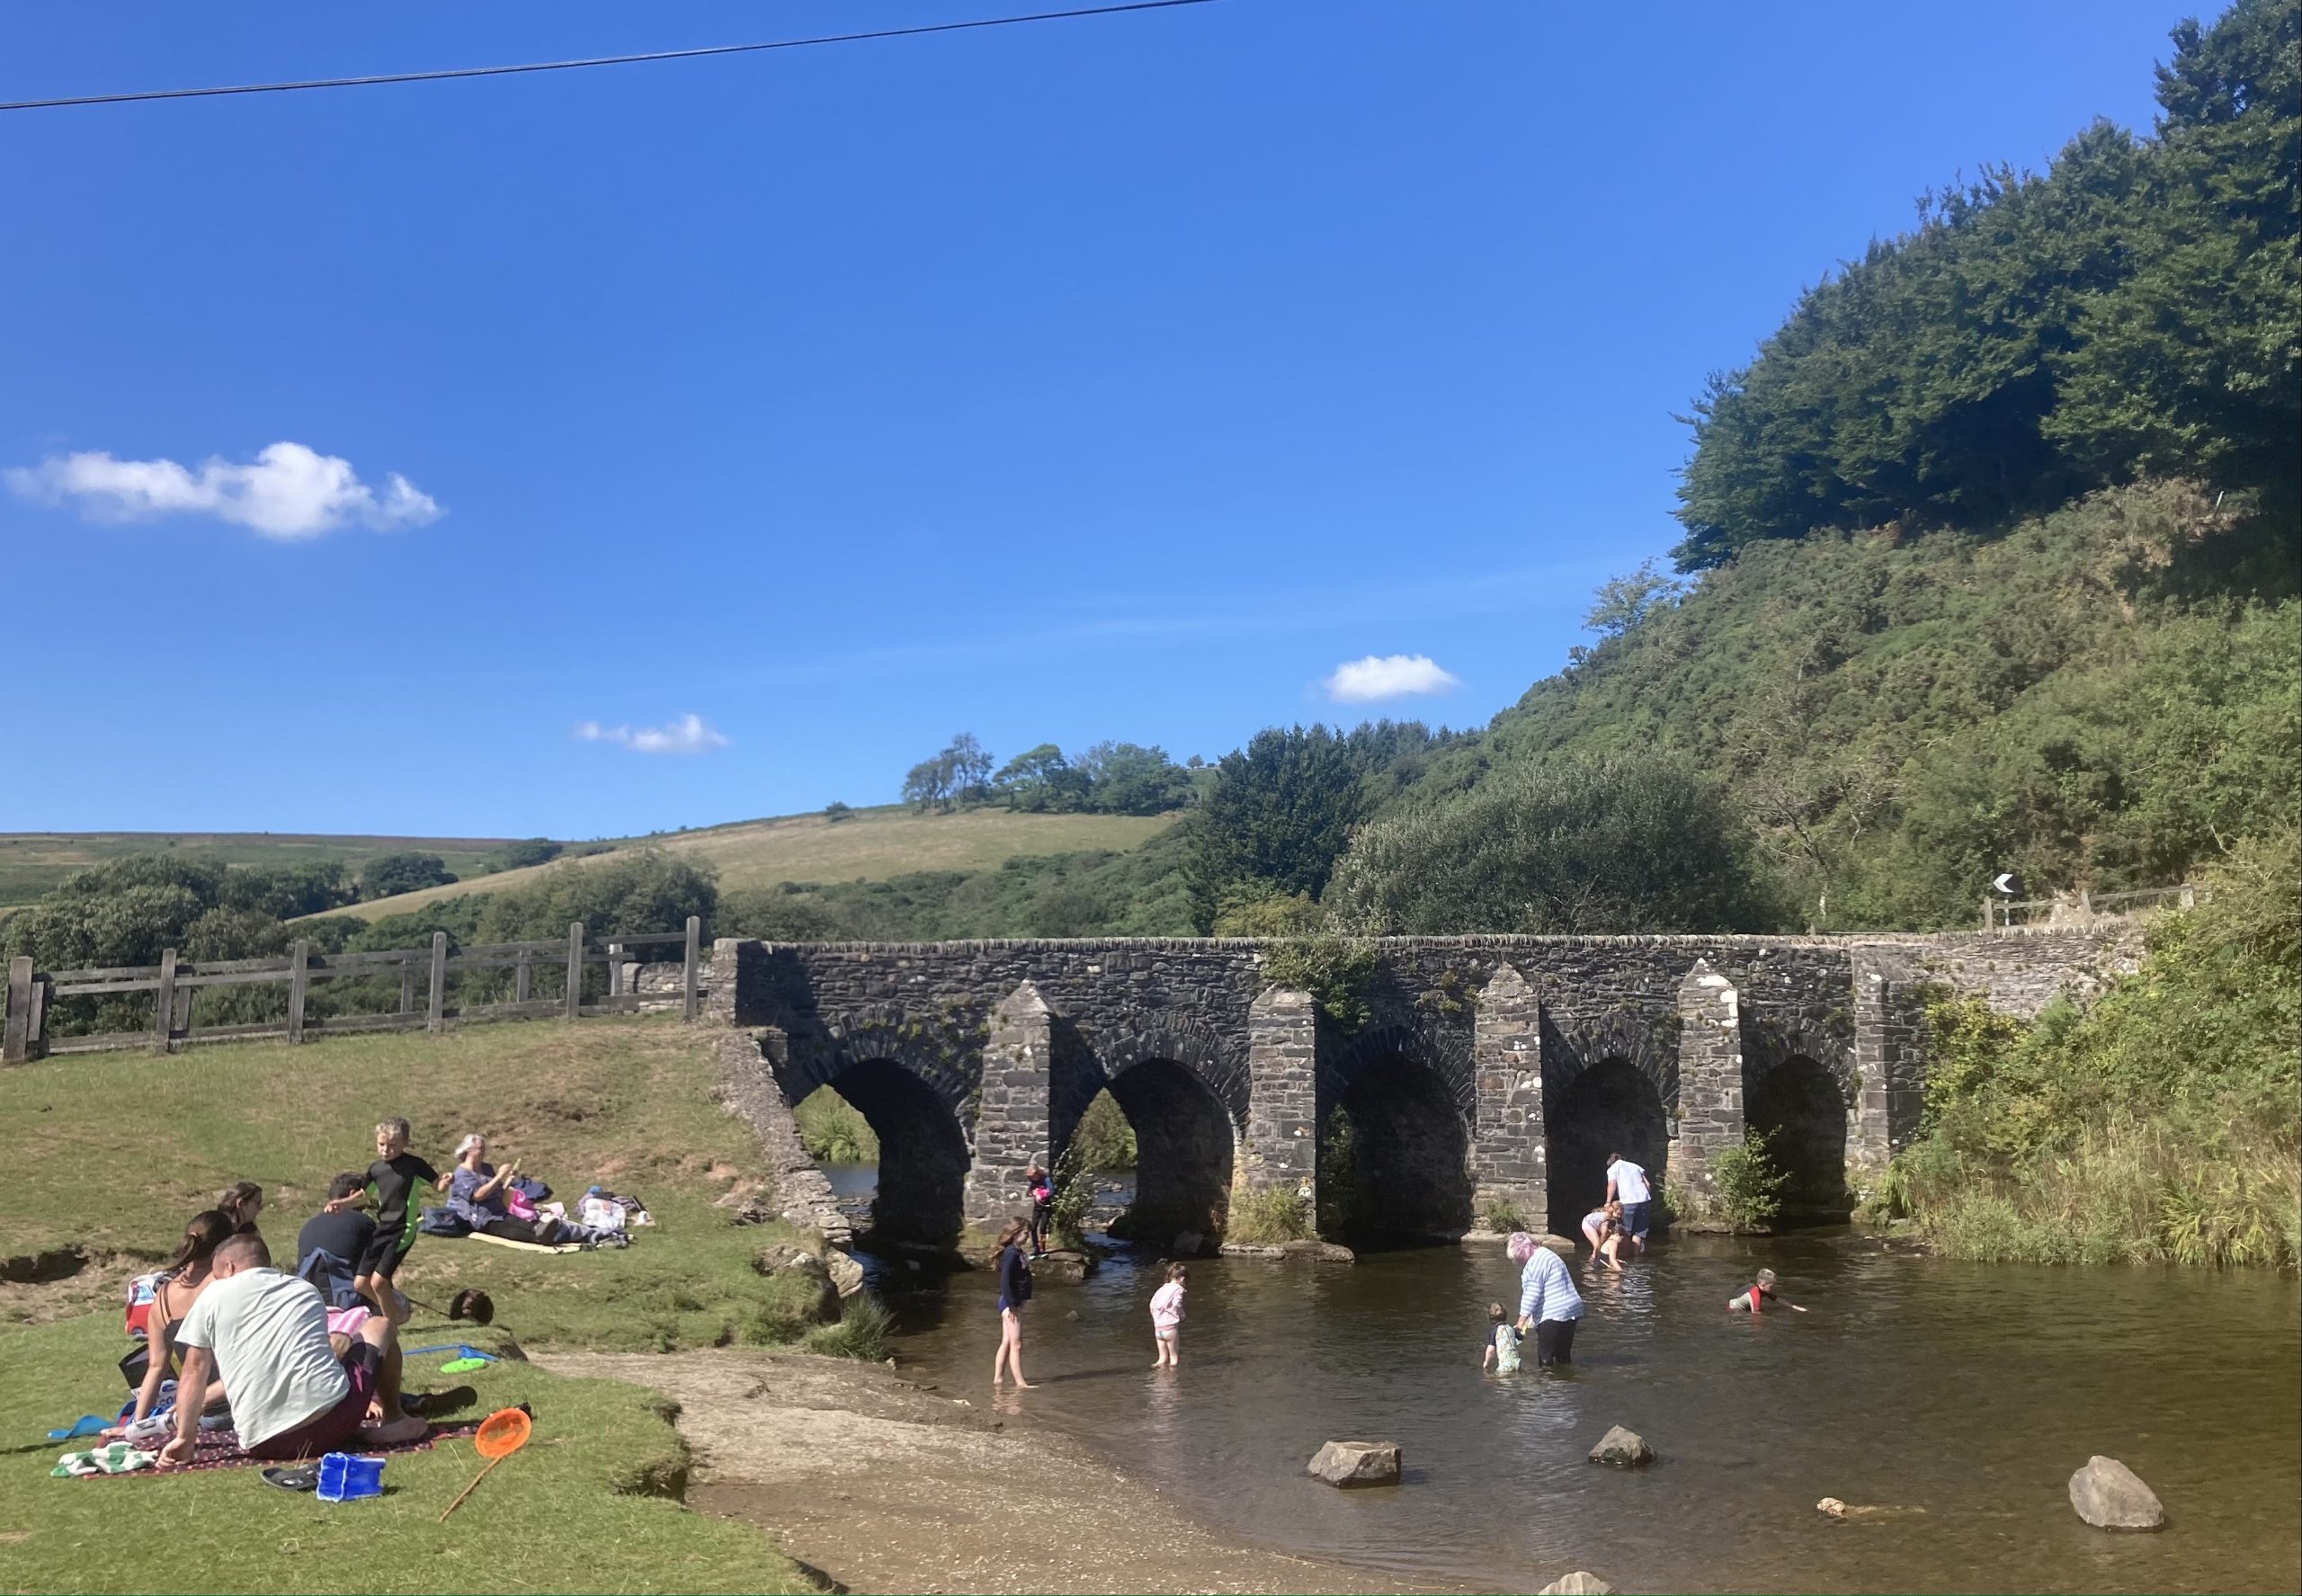 People Wild Swimming at Landacre Bridge near Withpool, a beautiful old arched bridge with clear water river flowing through it and grassy banks - blue skies and green countryside